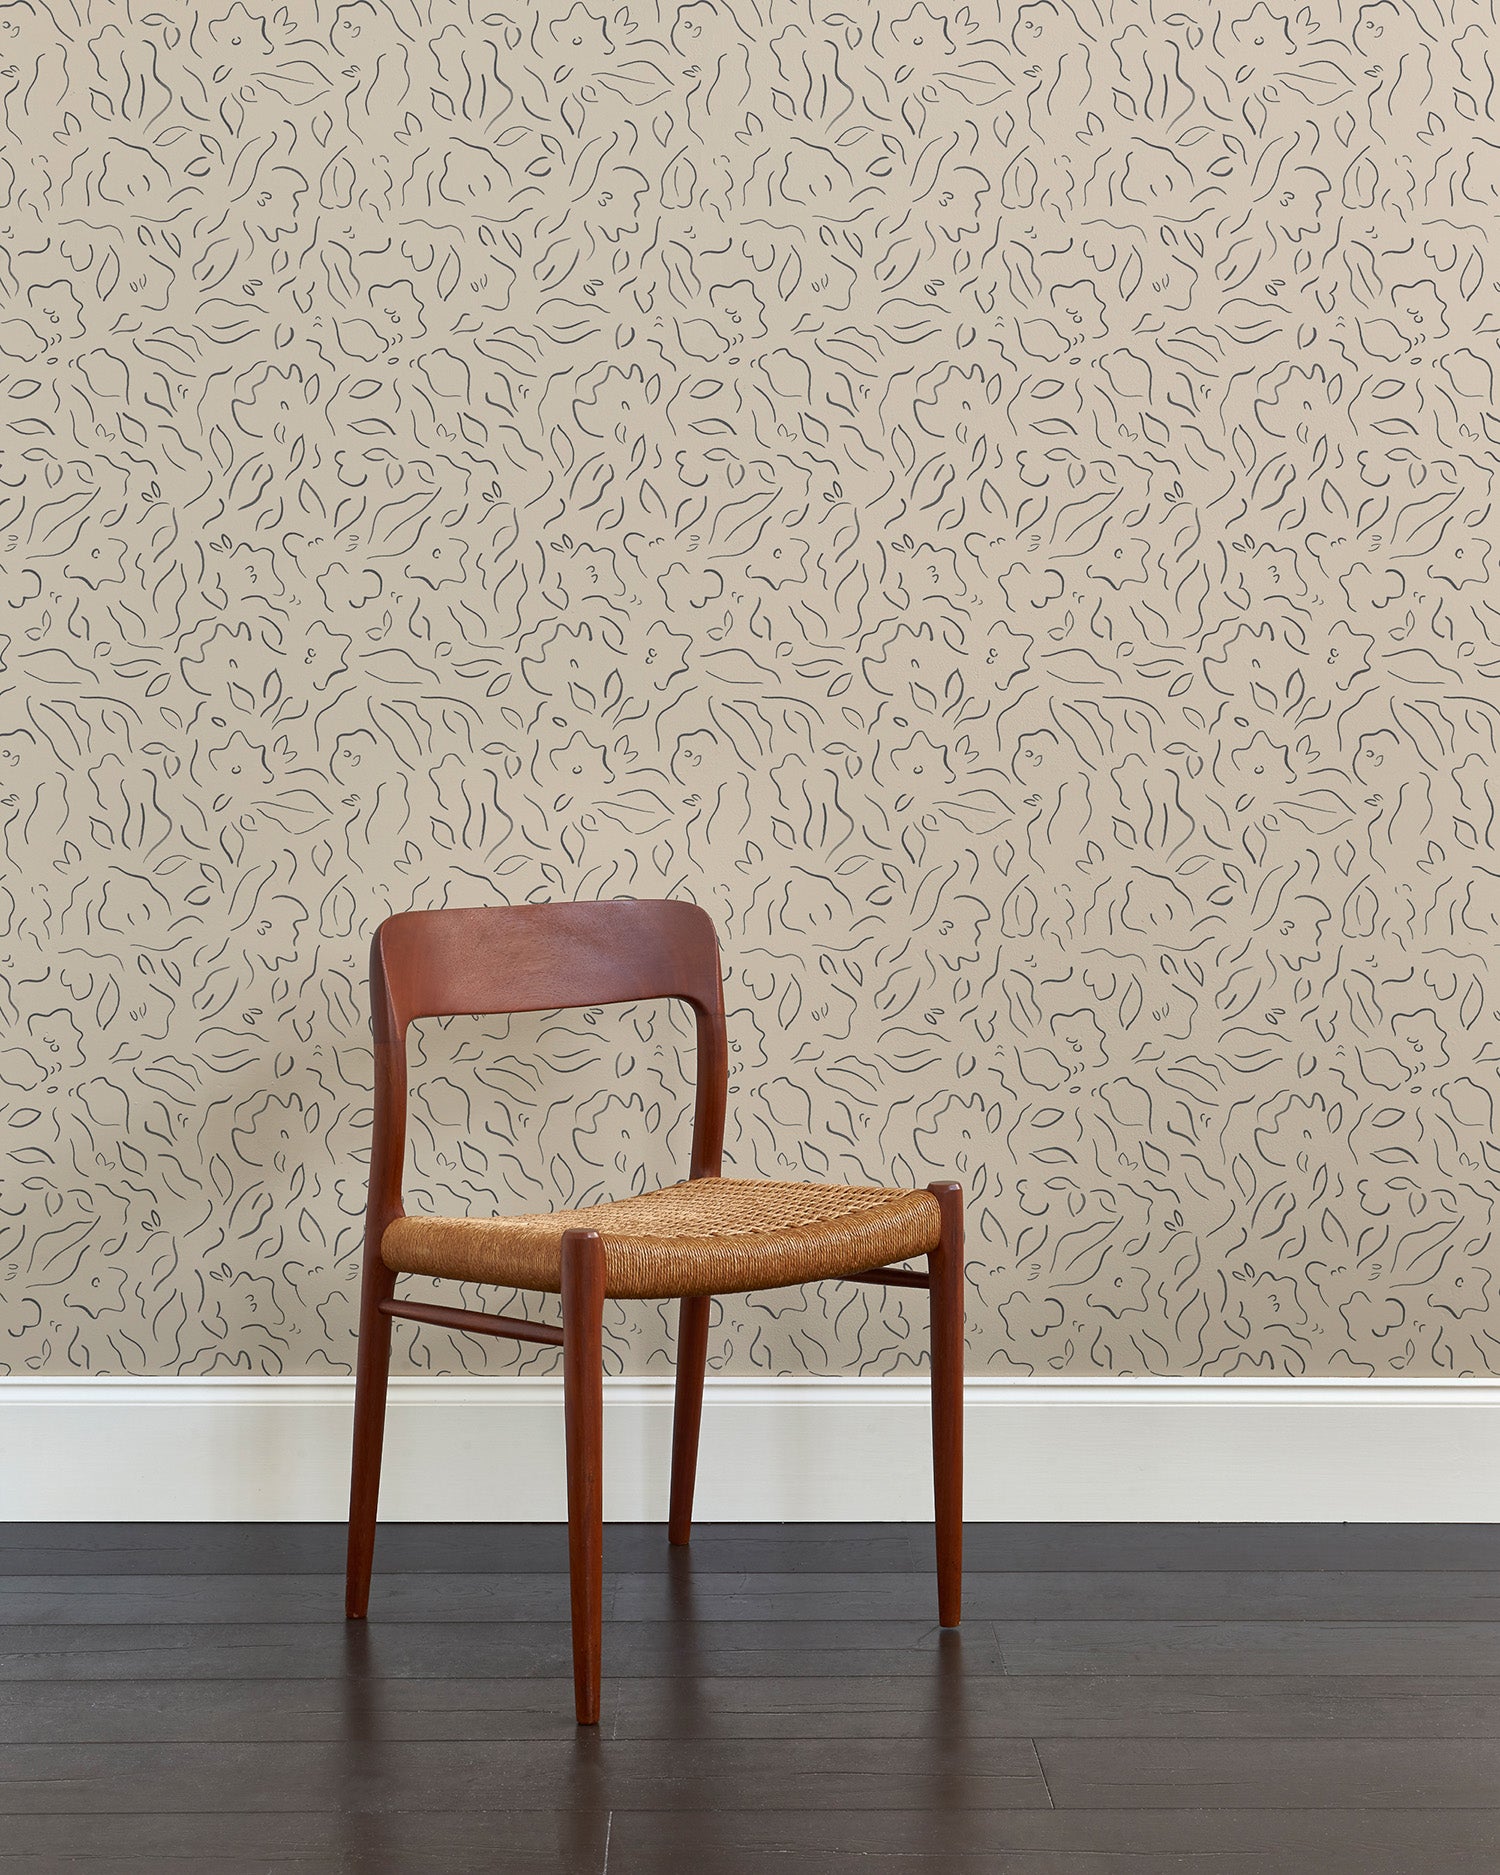 A wooden chair stands in front of a wall papered in a minimalist floral print in gray on a tan field.